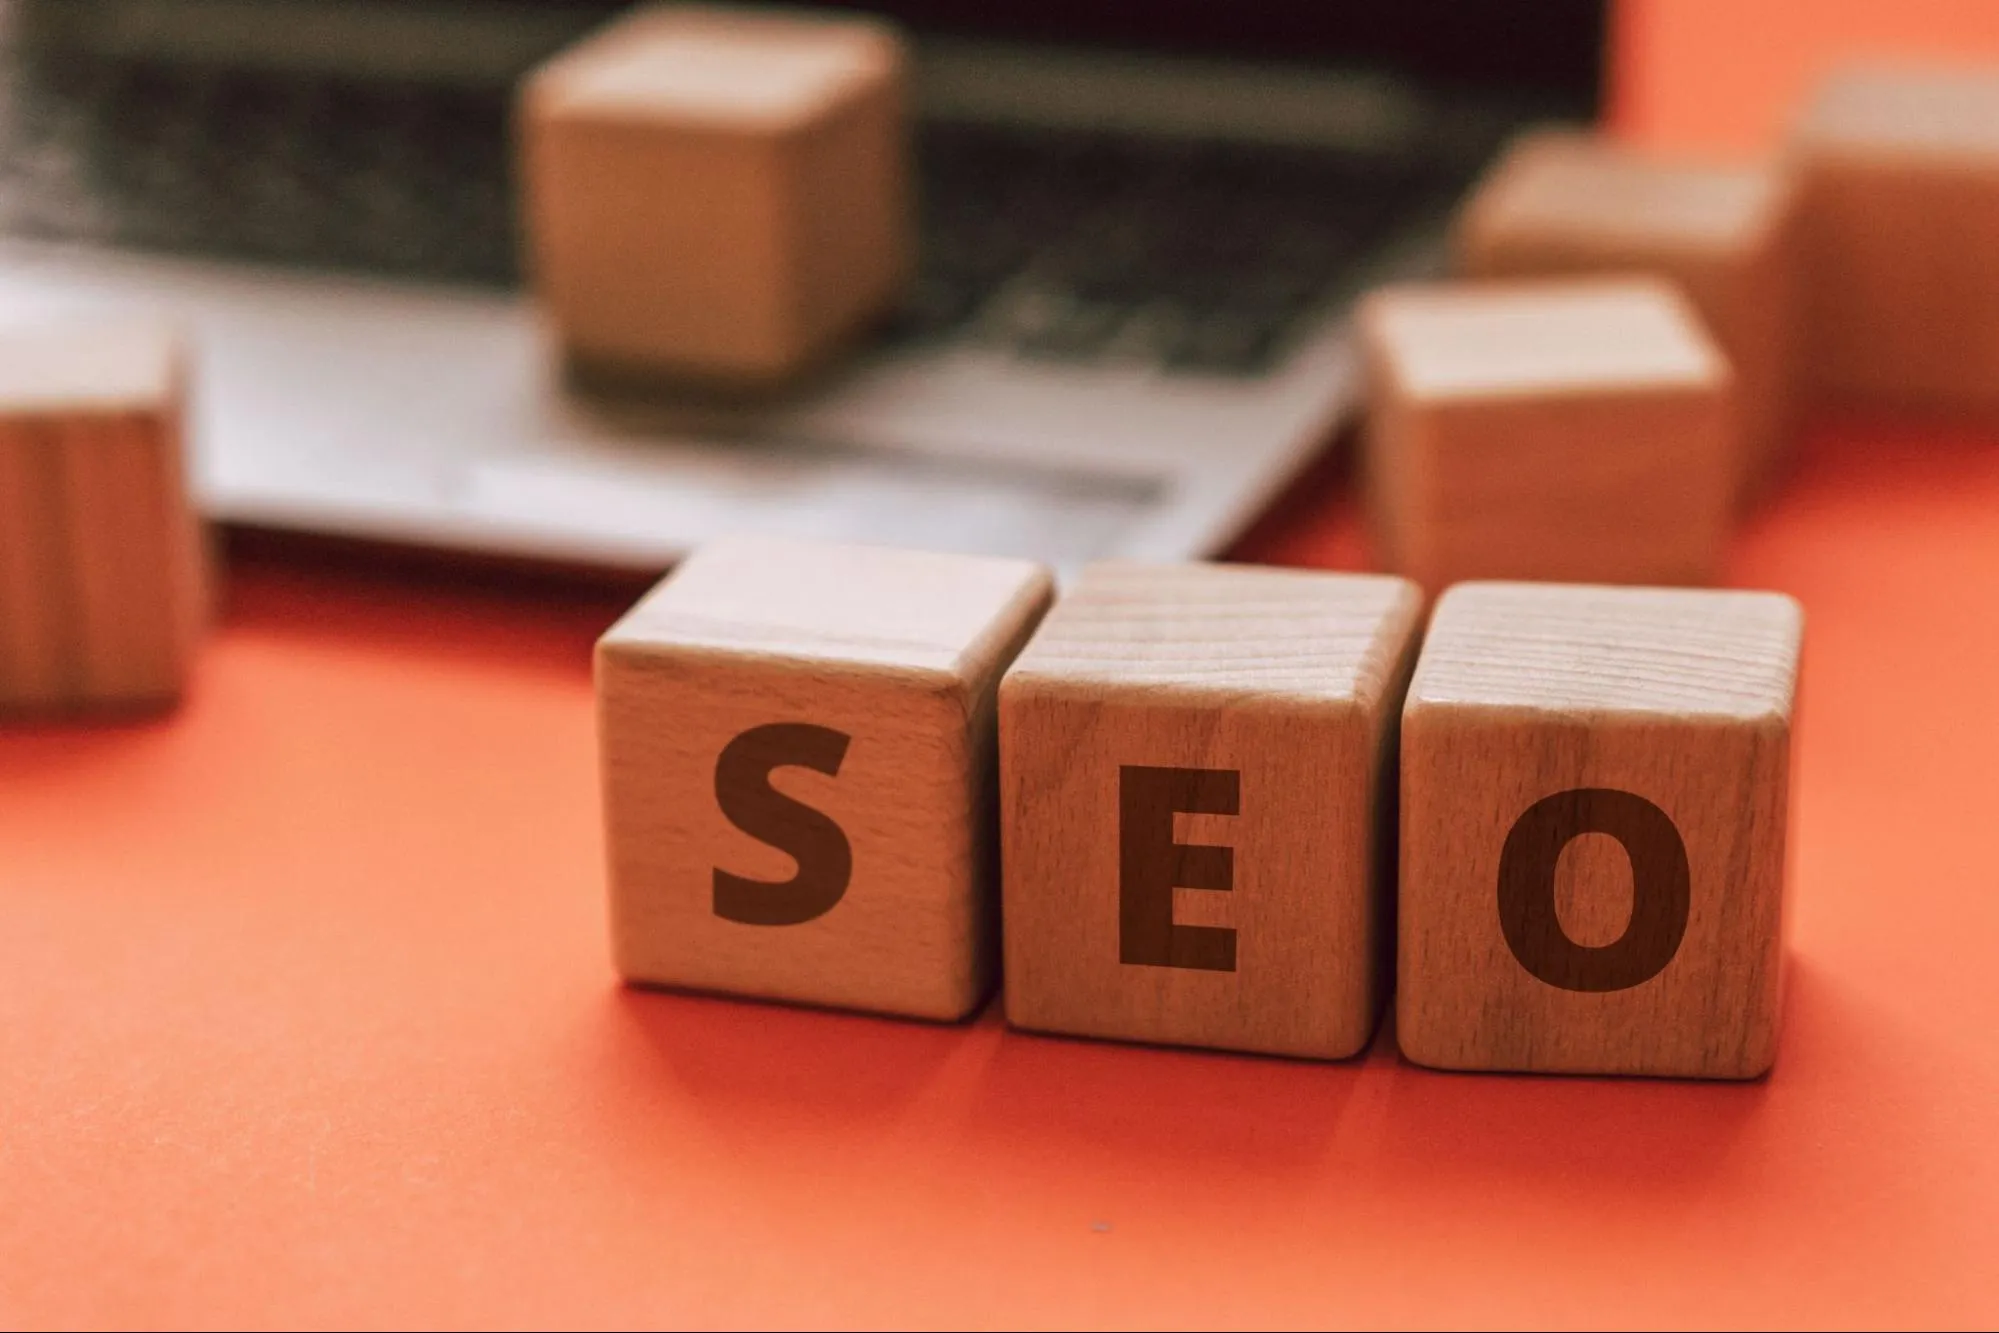 What are the best ways to improve your seo?